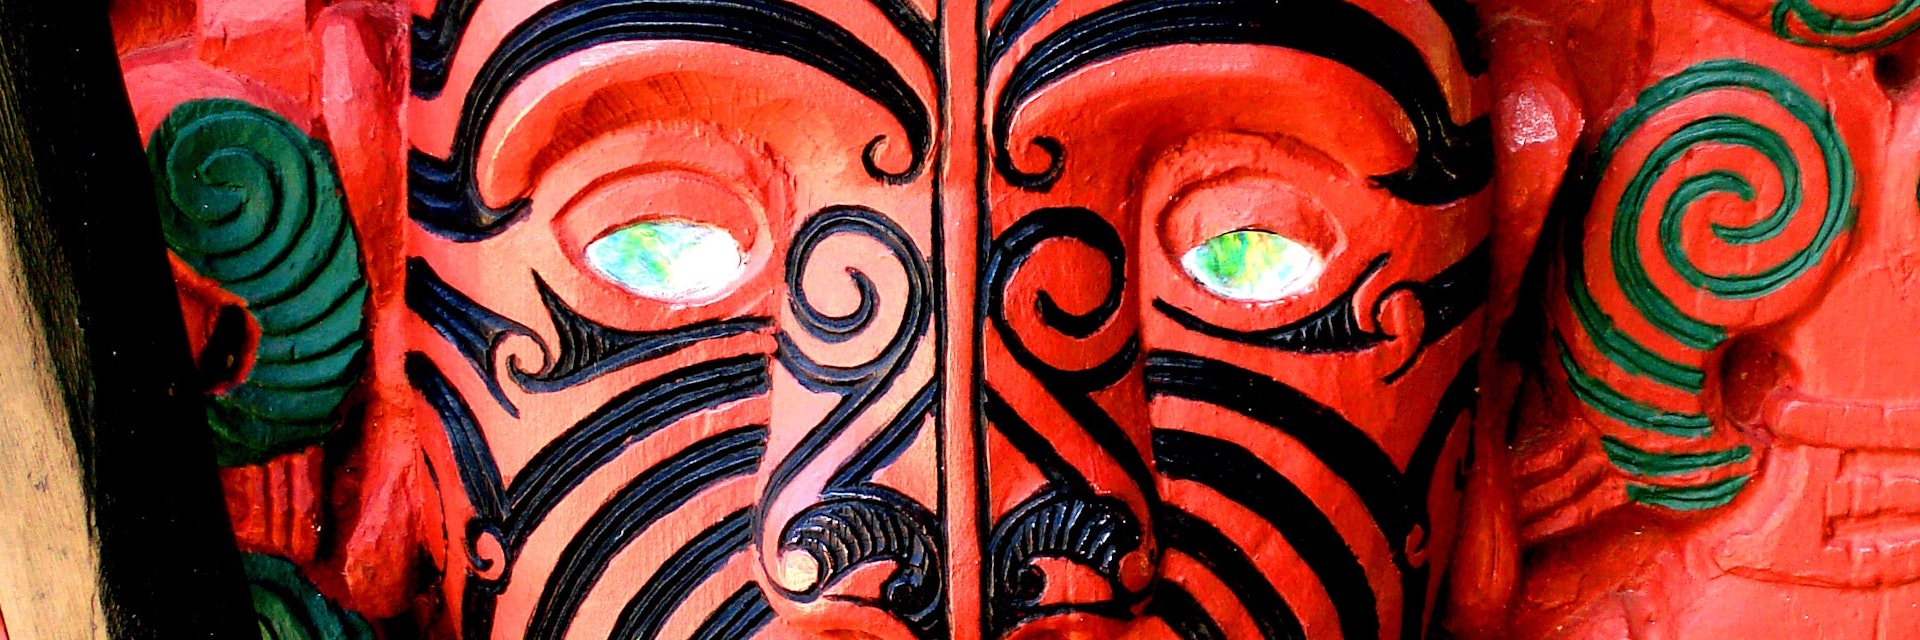 Red carving of a Maori Warrior.
26083891
polynesian, cultural, waitangi, warrior, zealand, culture, carving, ground, tattoo, native, treaty, paint, maori, male, face, wood, luck, art, new, red